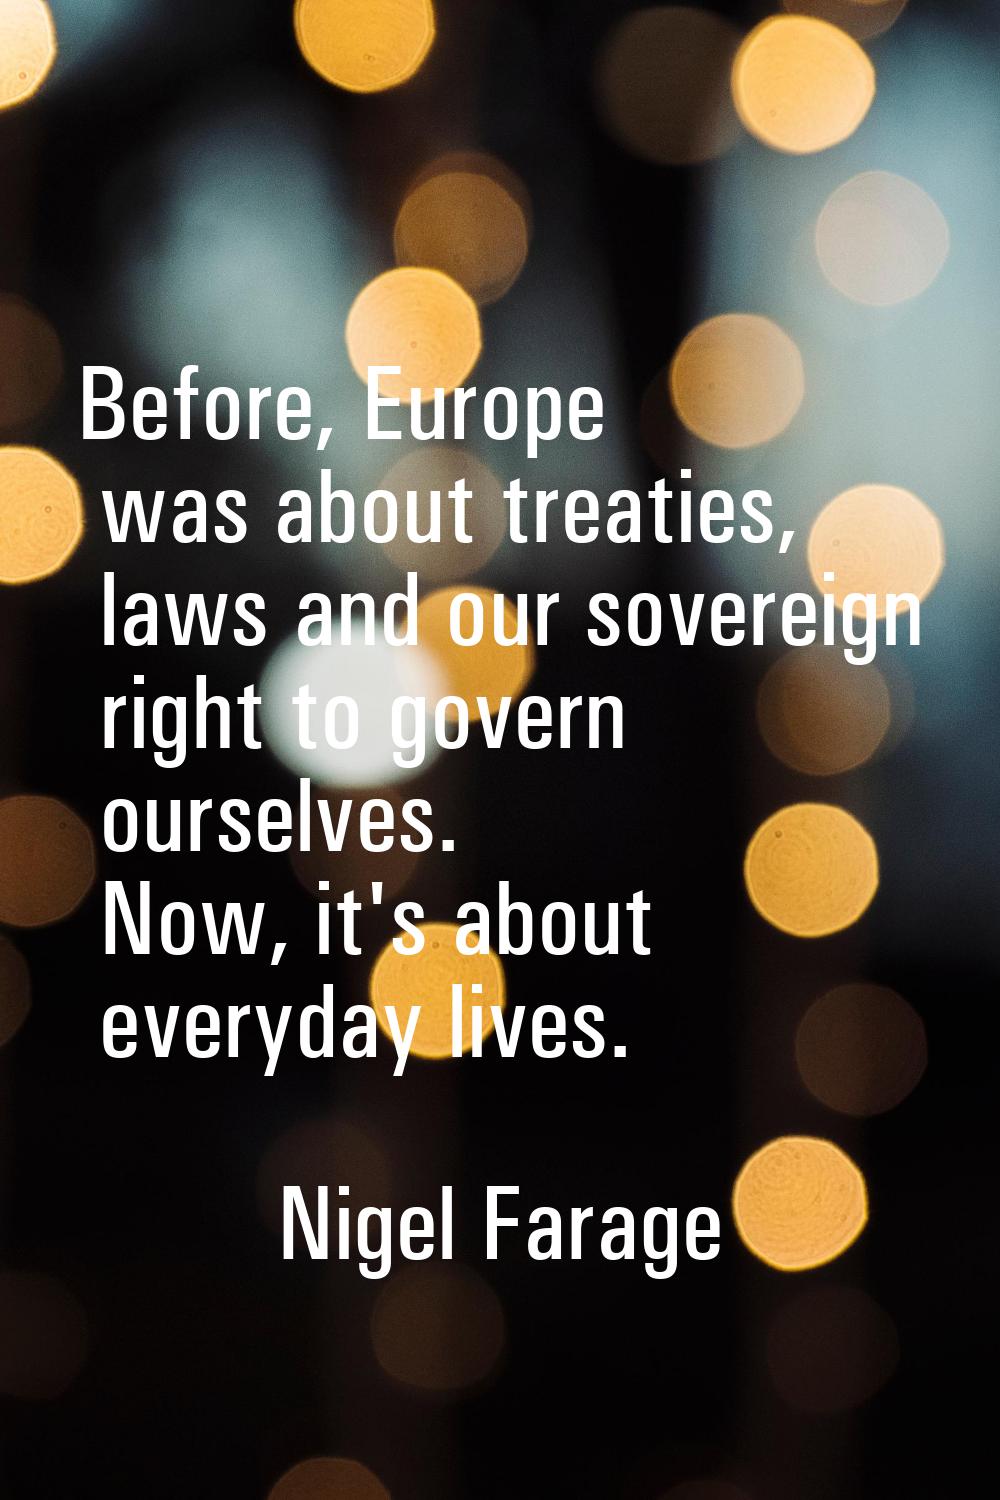 Before, Europe was about treaties, laws and our sovereign right to govern ourselves. Now, it's abou